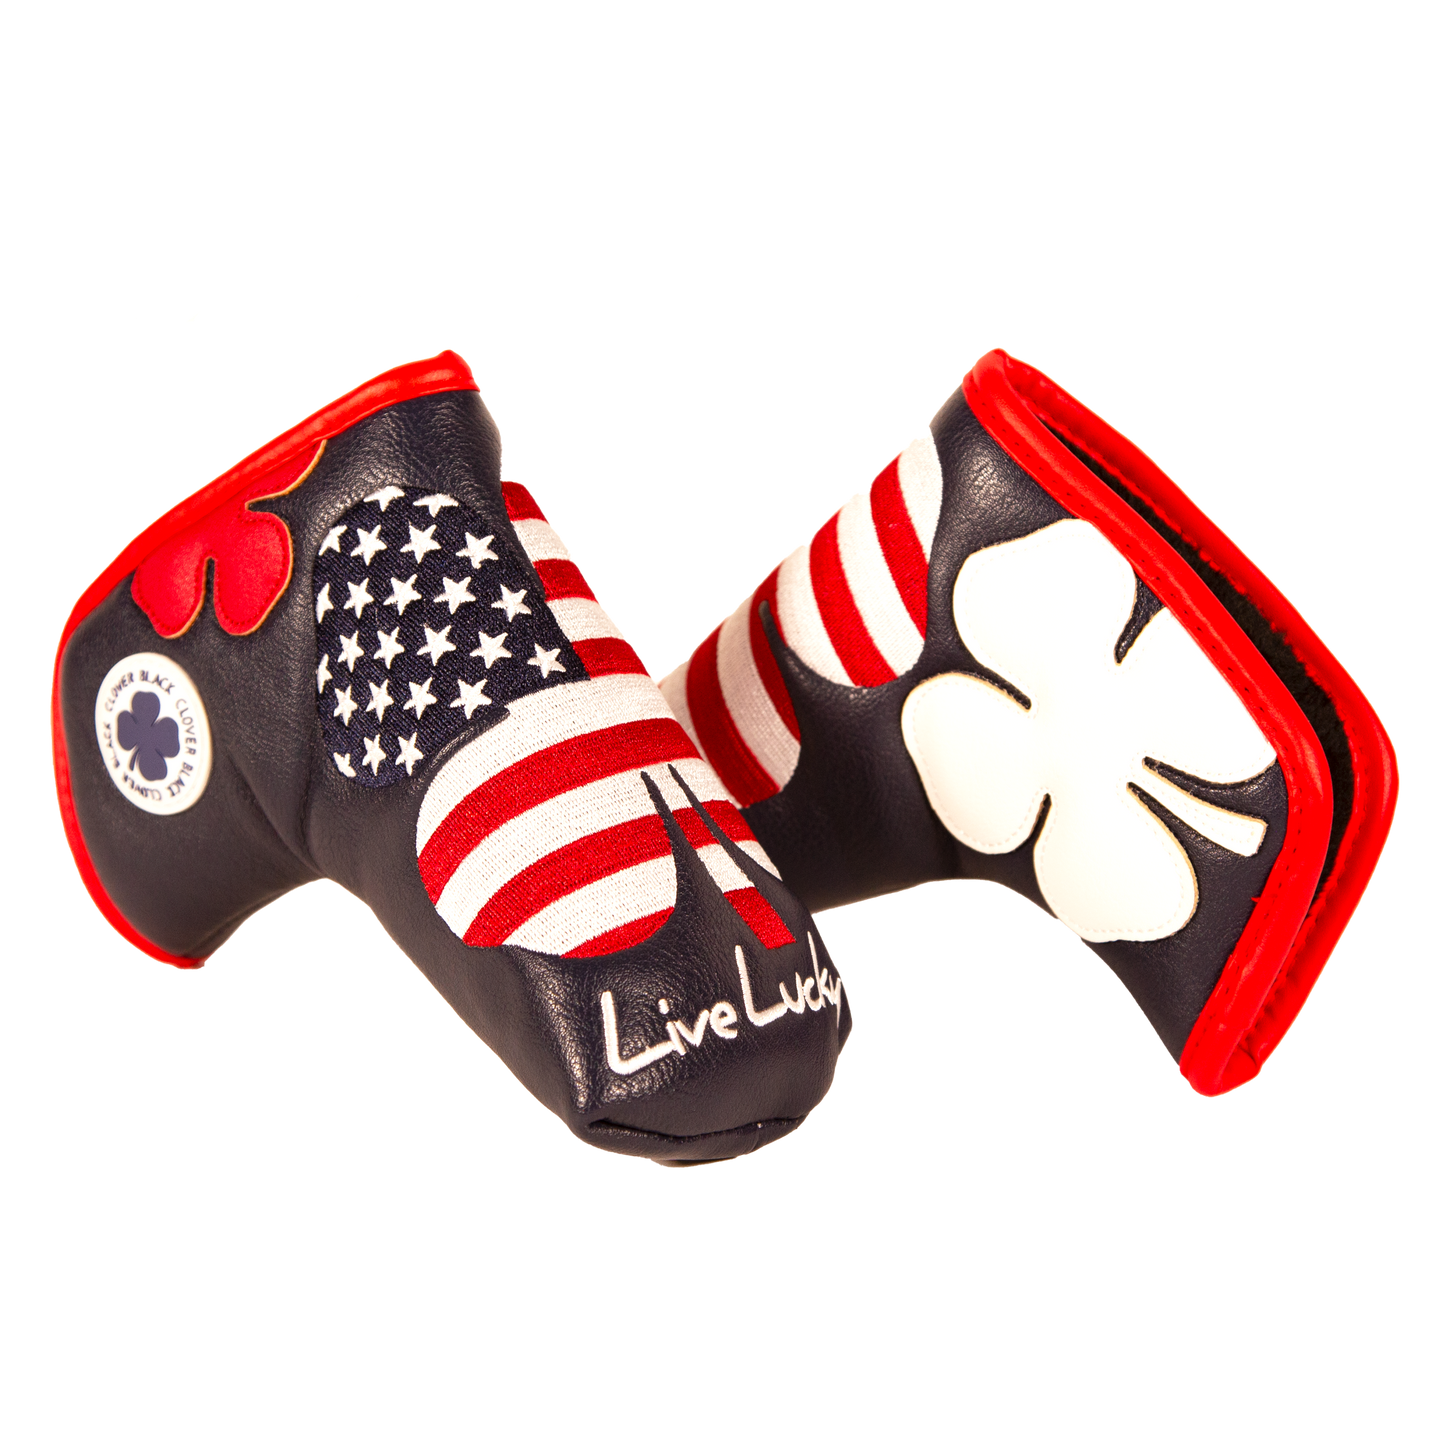 Live Lucky "USA"  Blade Putter Cover